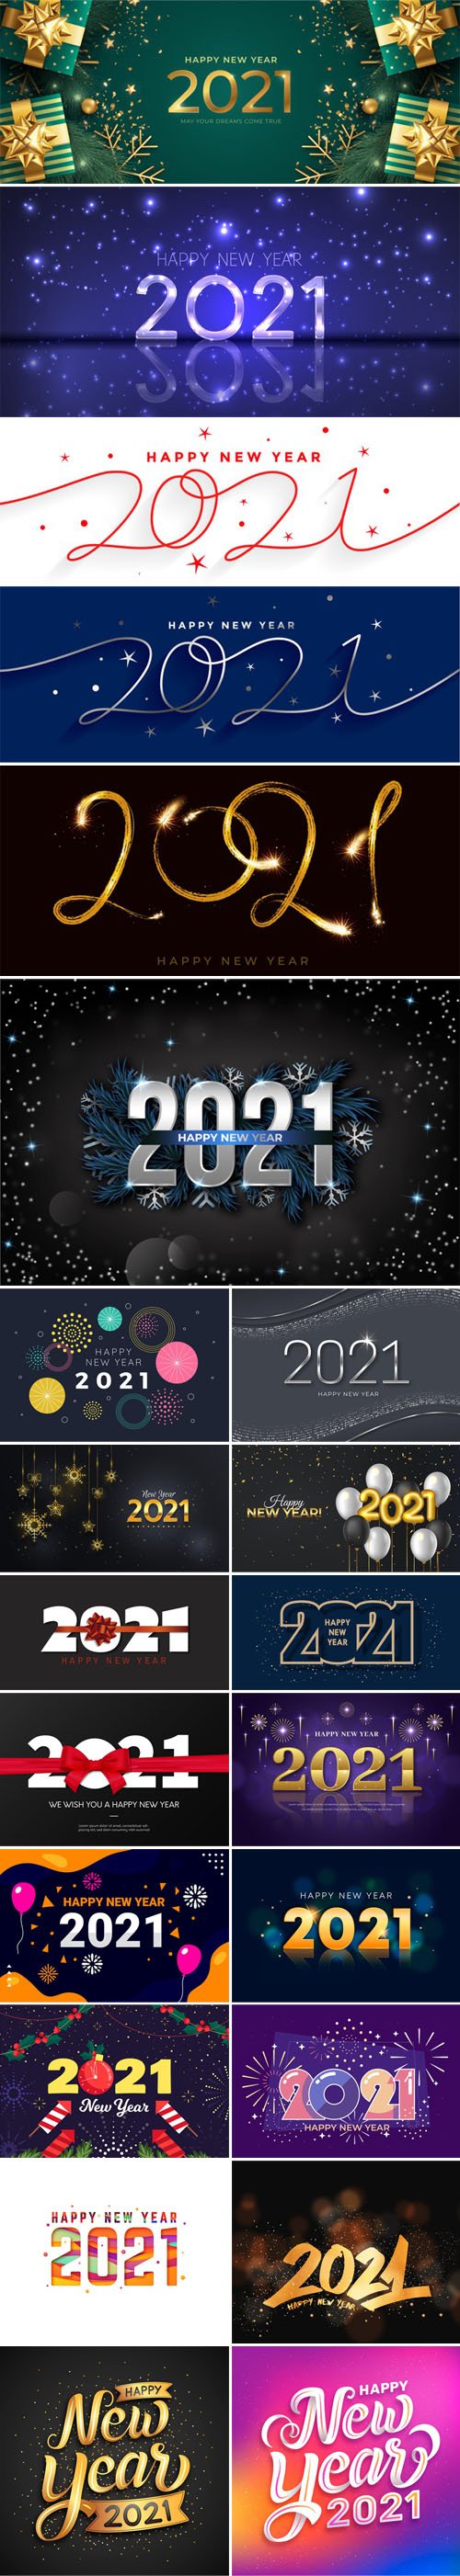 23 Happy New Year 2021 Backgrounds & Lettering Templates in Vector